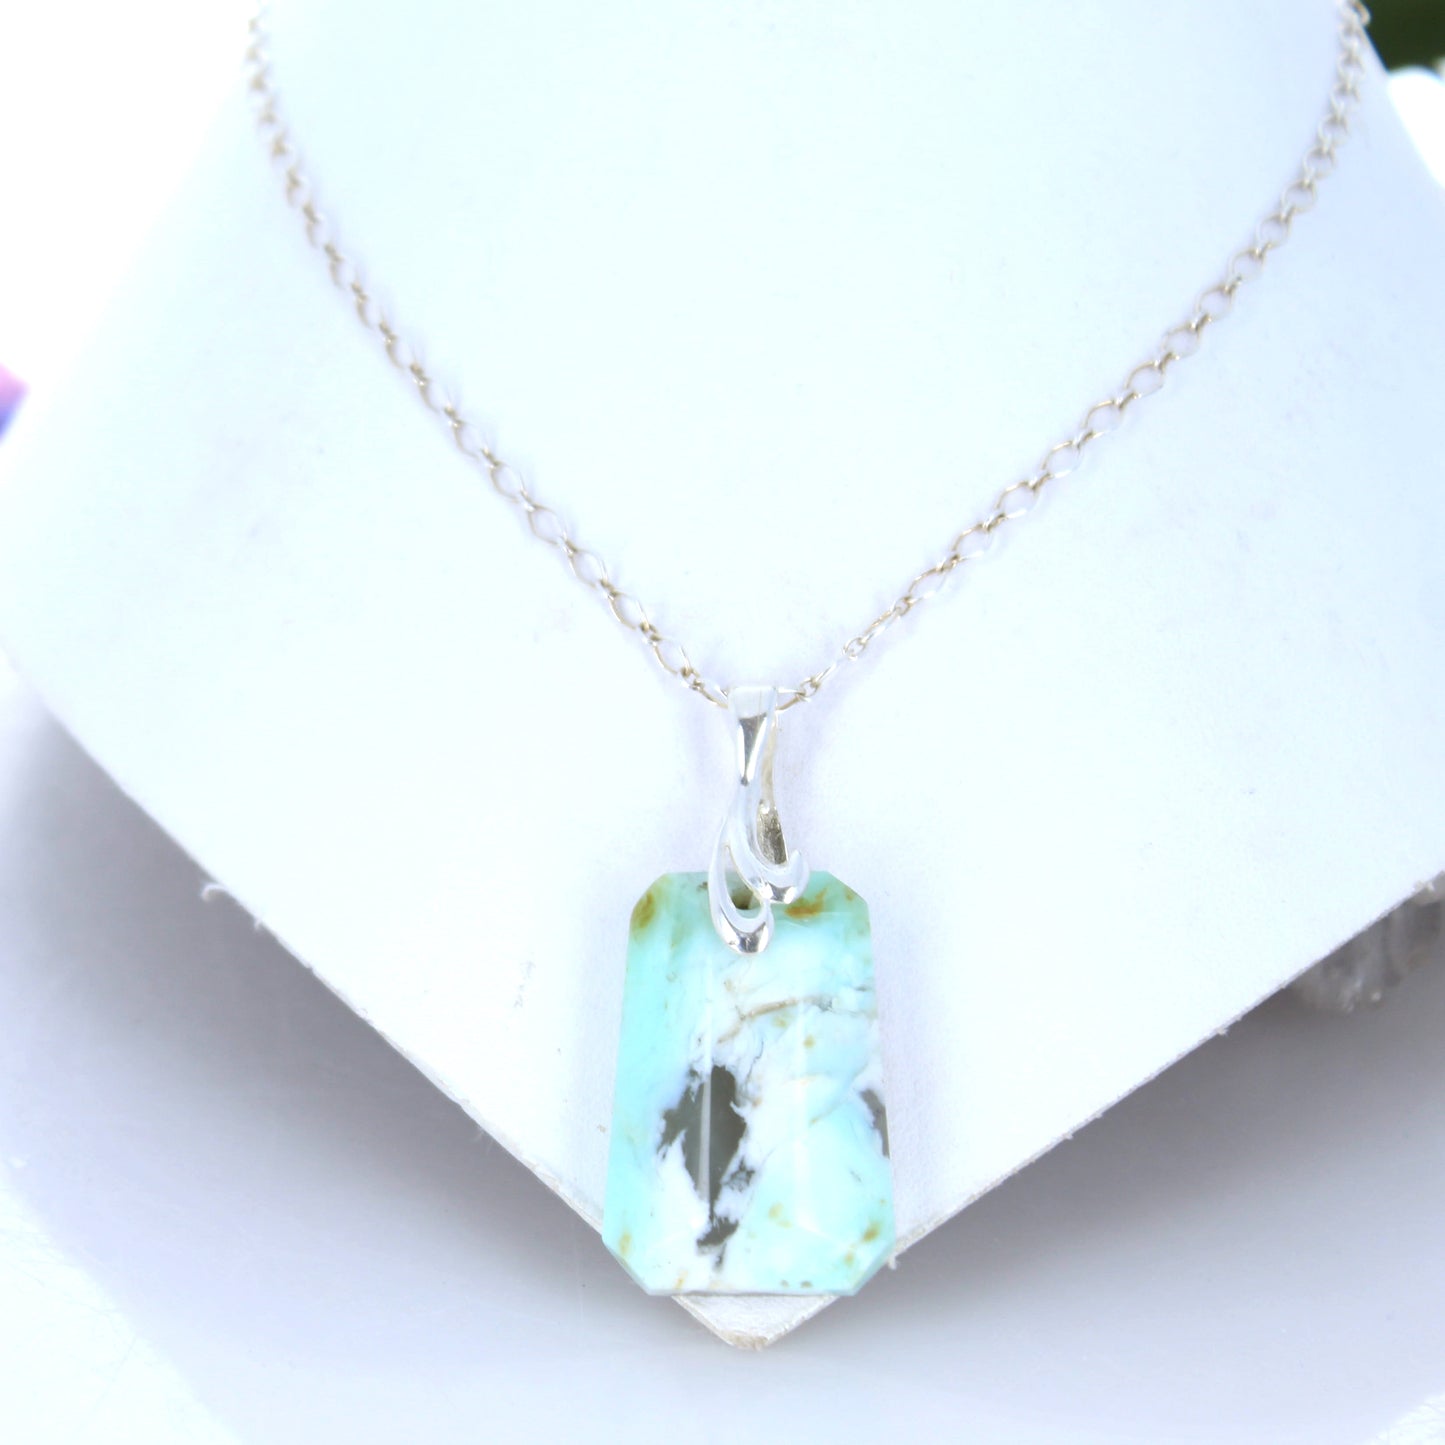 Ethereal Blue PERUVIAN OPAL Necklace Pendant Sterling Bail